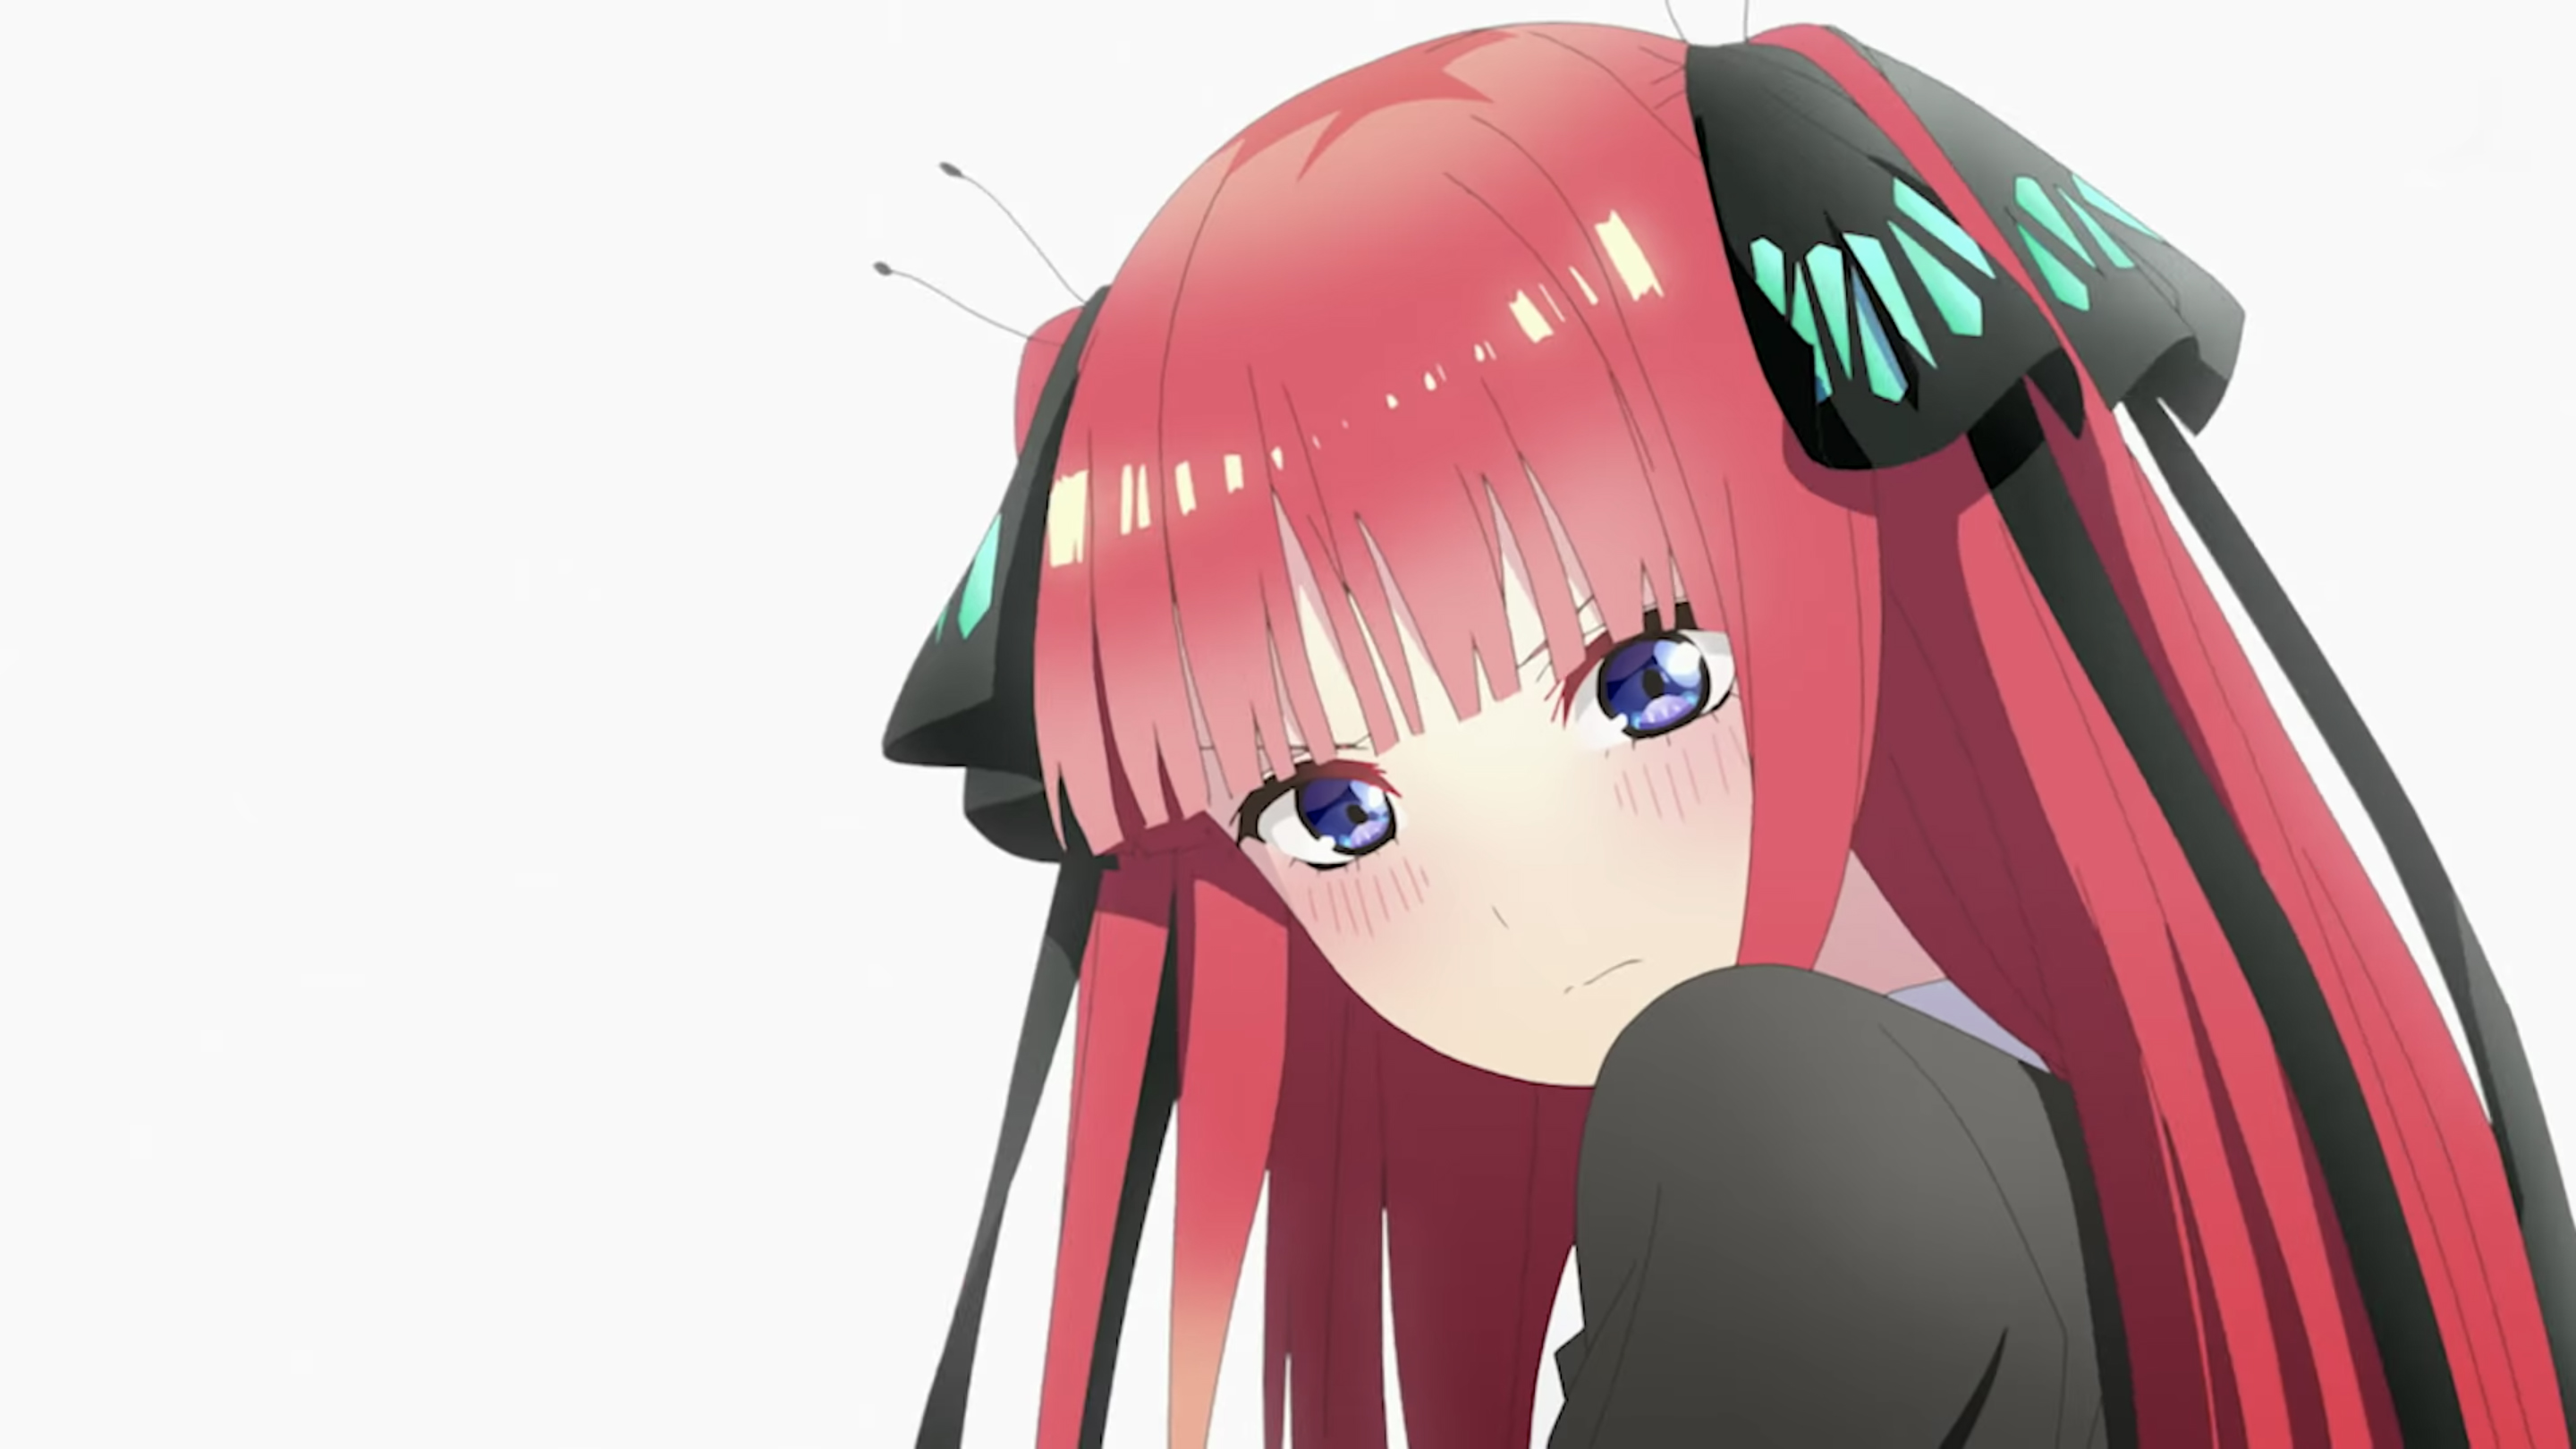 Crunchyroll - The Quintessential Quintuplets Season 2 TV Anime Will Be  Fully Completed Before Broadcast Says Anime Studio Founder